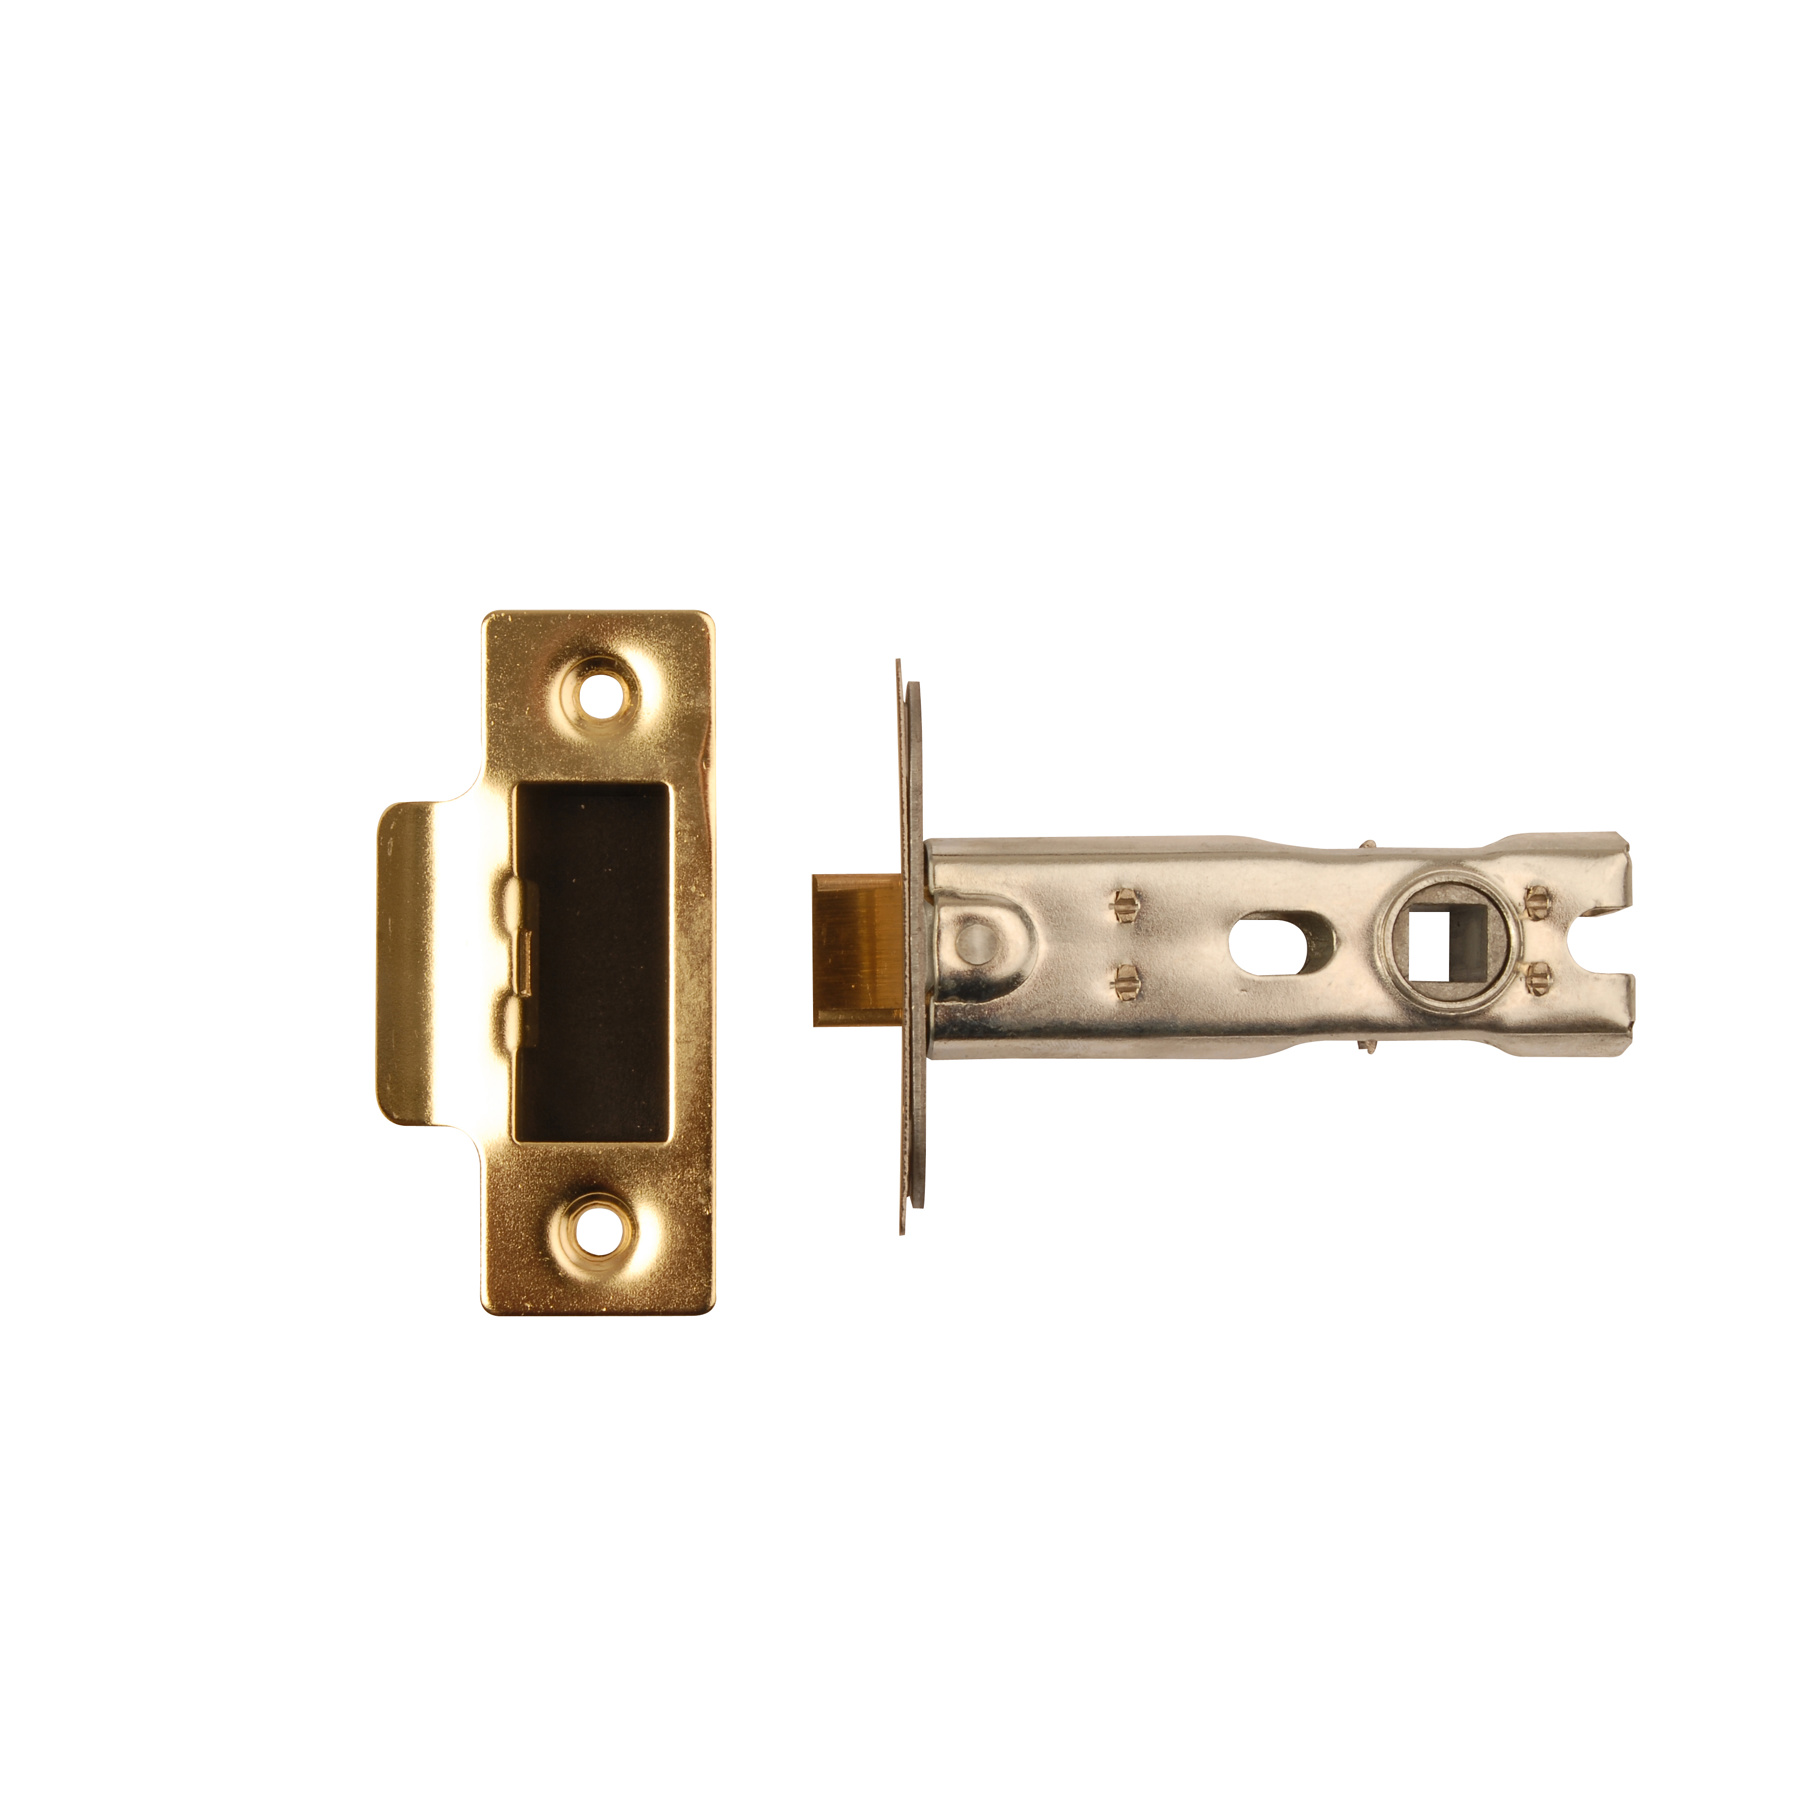 MORTICE LATCH 76MM POLISHED BRASS (BOLT THROUGH FIXING) (CLAM) REF DH007169 DALE